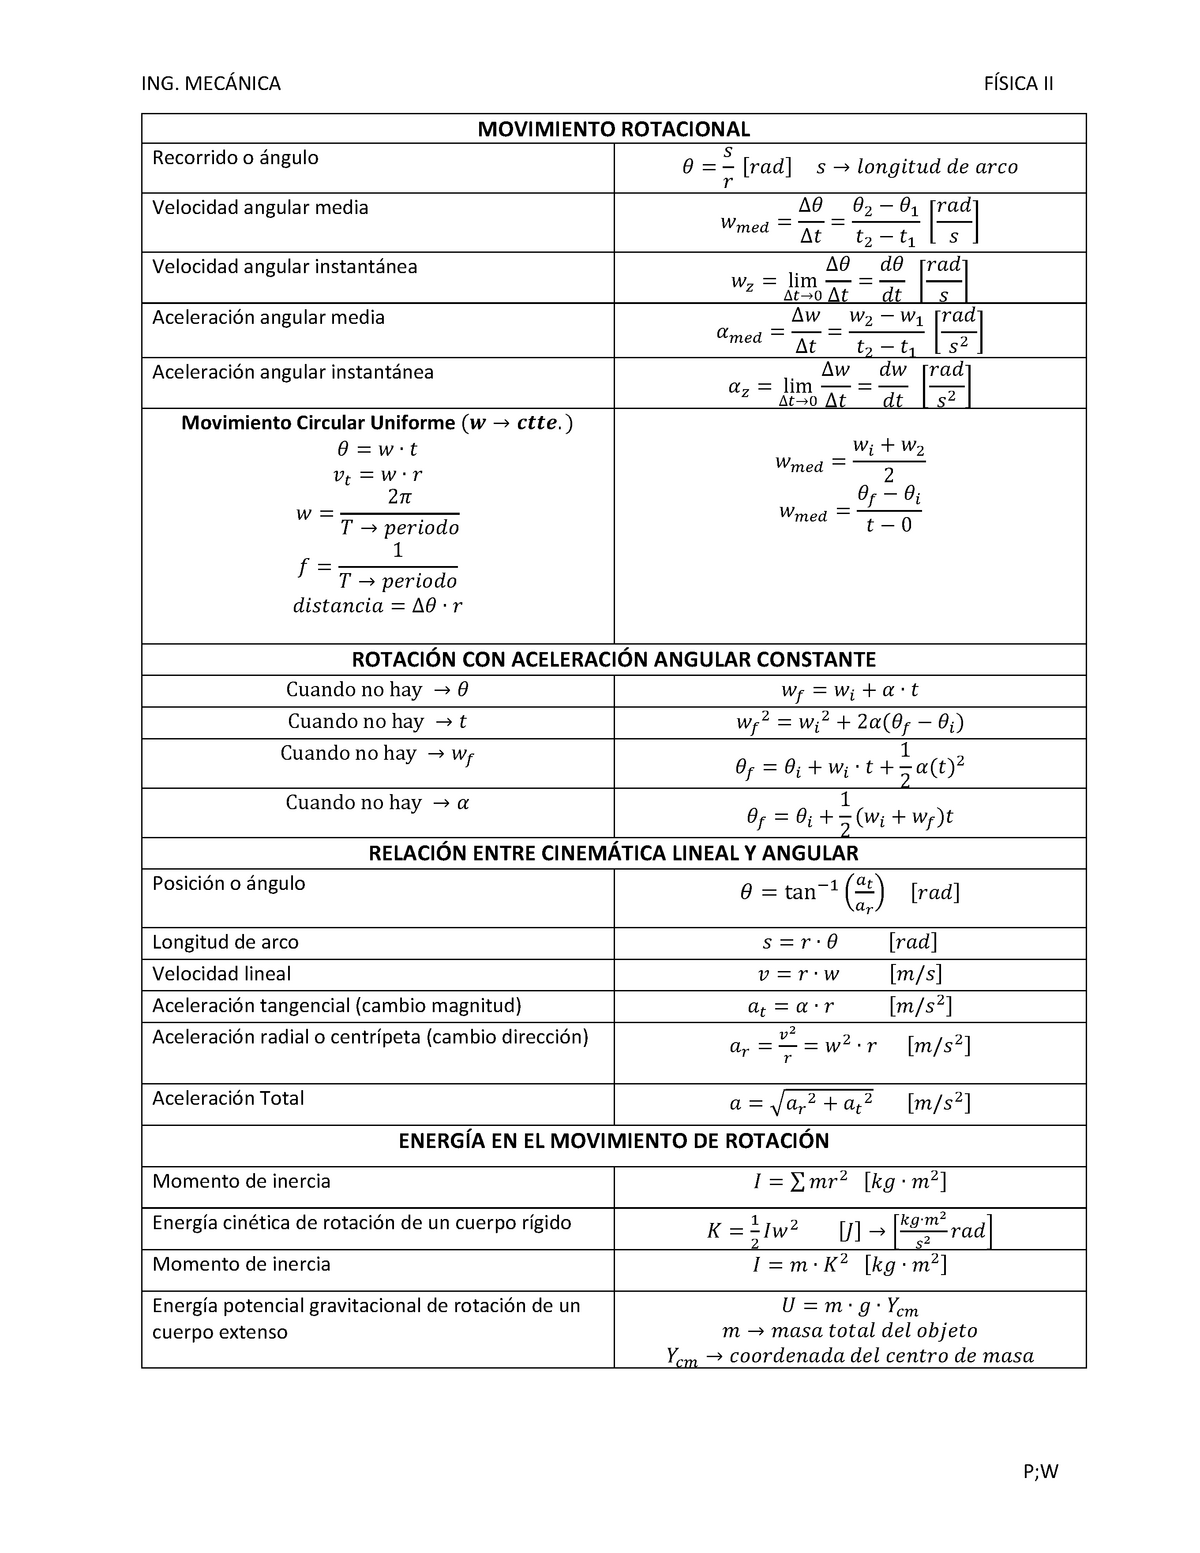 Formulario Fisica 2 P1 Wp Warning Tt Undefined Function 32 Ing MecÁnica FÍsica Ii Pw 5818